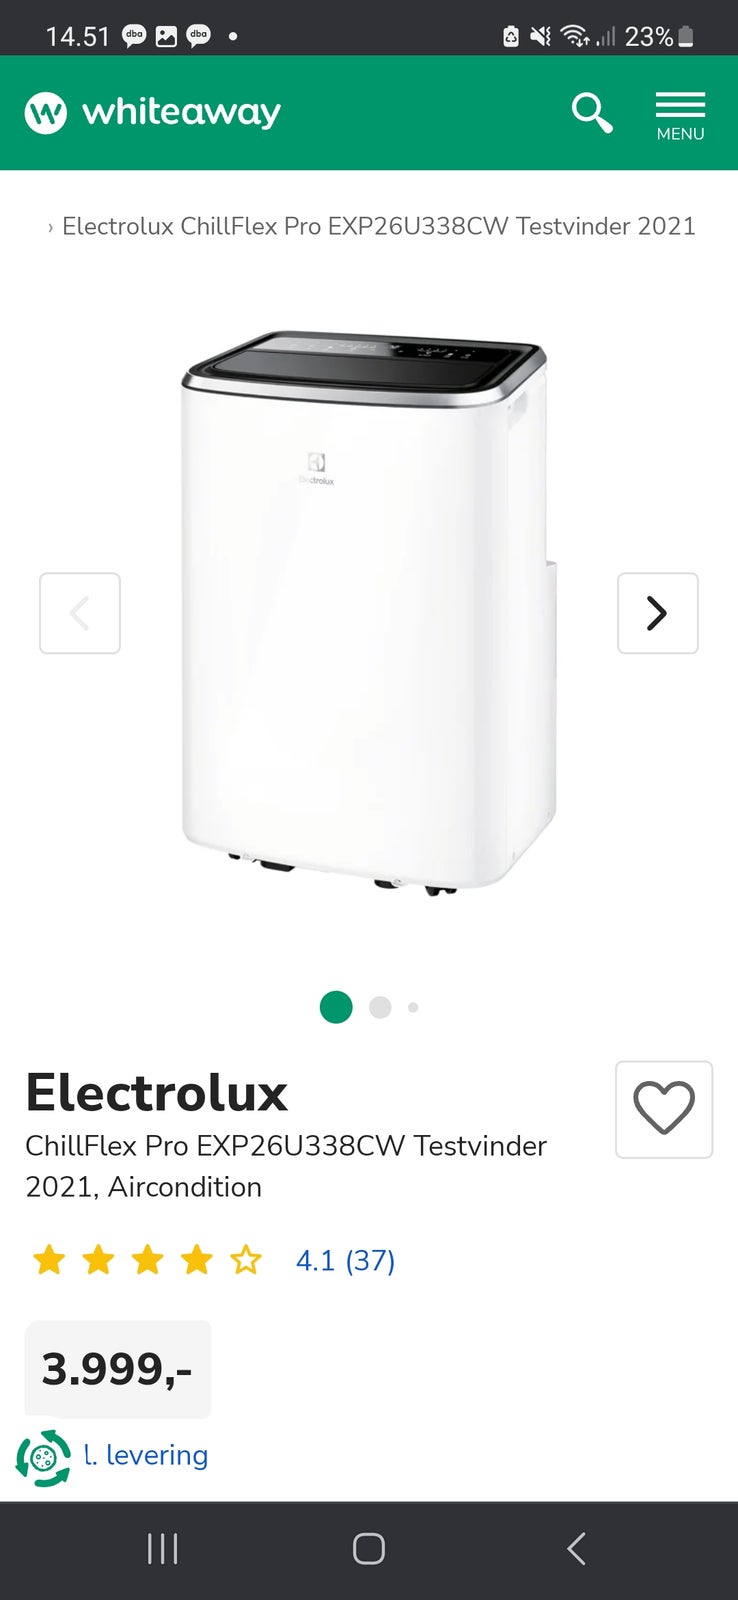 Aircondition, Electrolux